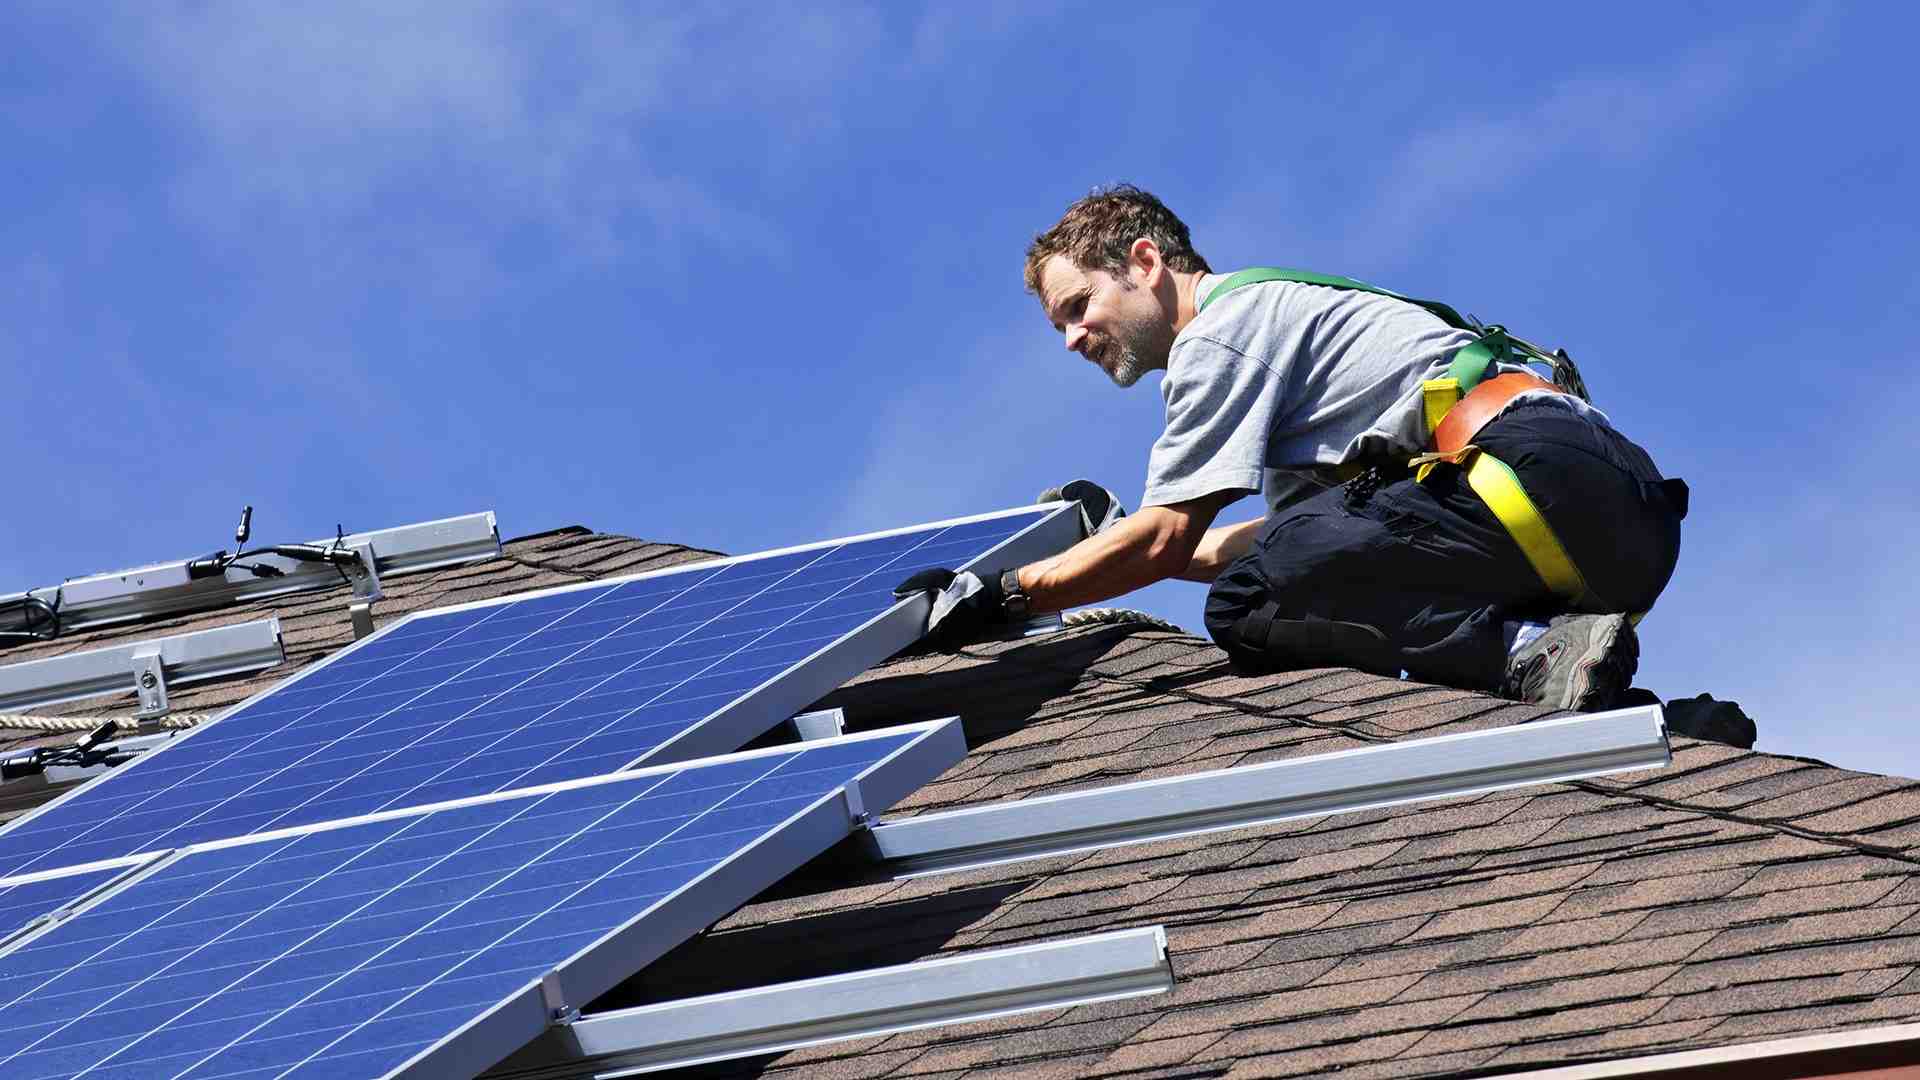 How do I become a solar contractor?